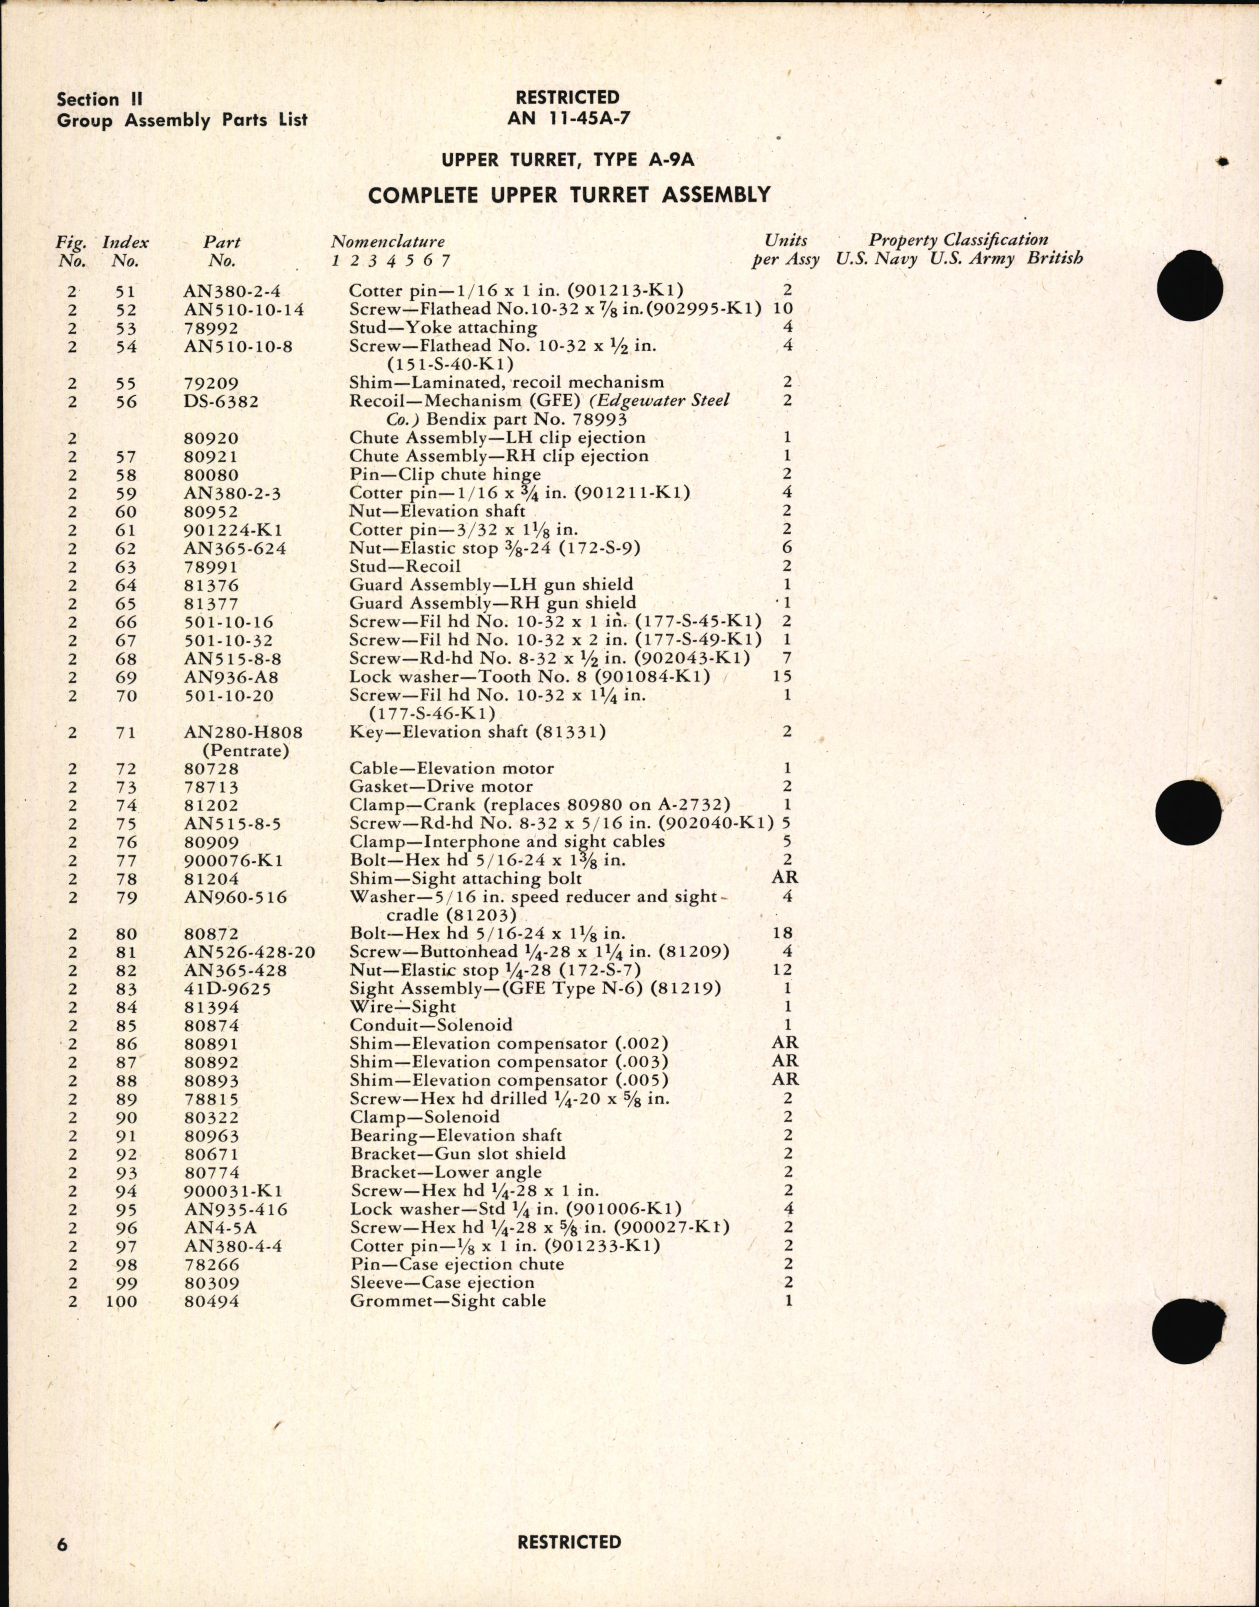 Sample page 8 from AirCorps Library document: Turret Parts Catalog for Type A-9A, Navy Model 250CE-3